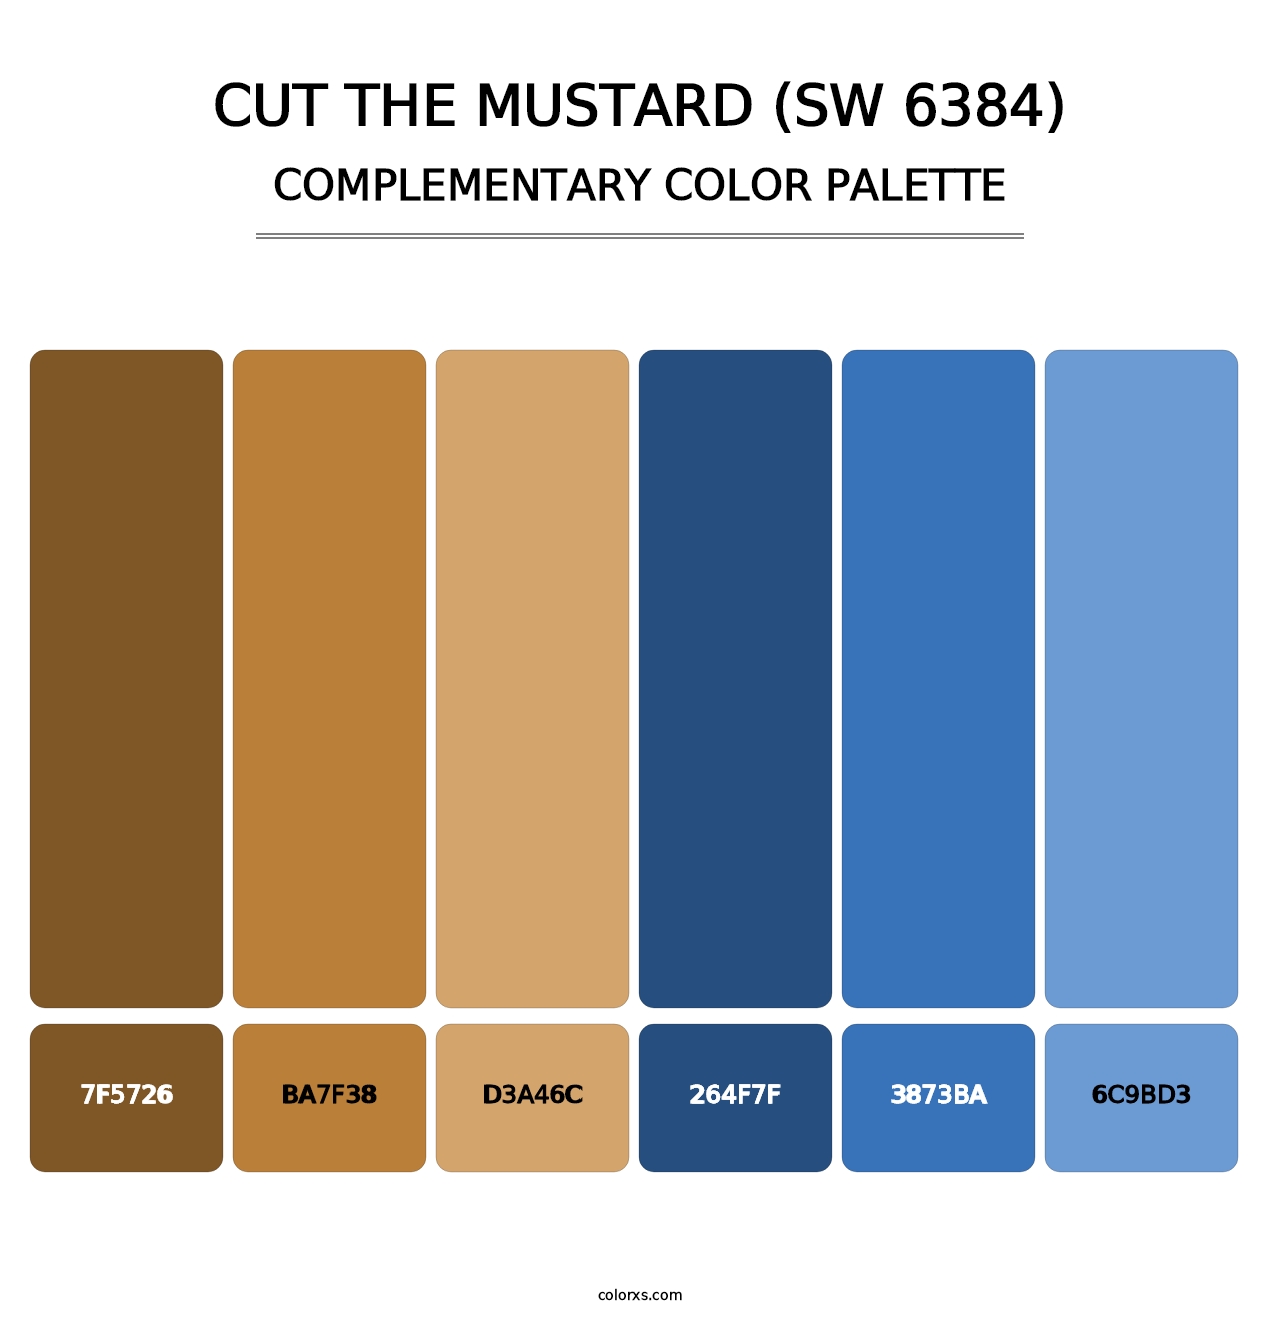 Cut the Mustard (SW 6384) - Complementary Color Palette